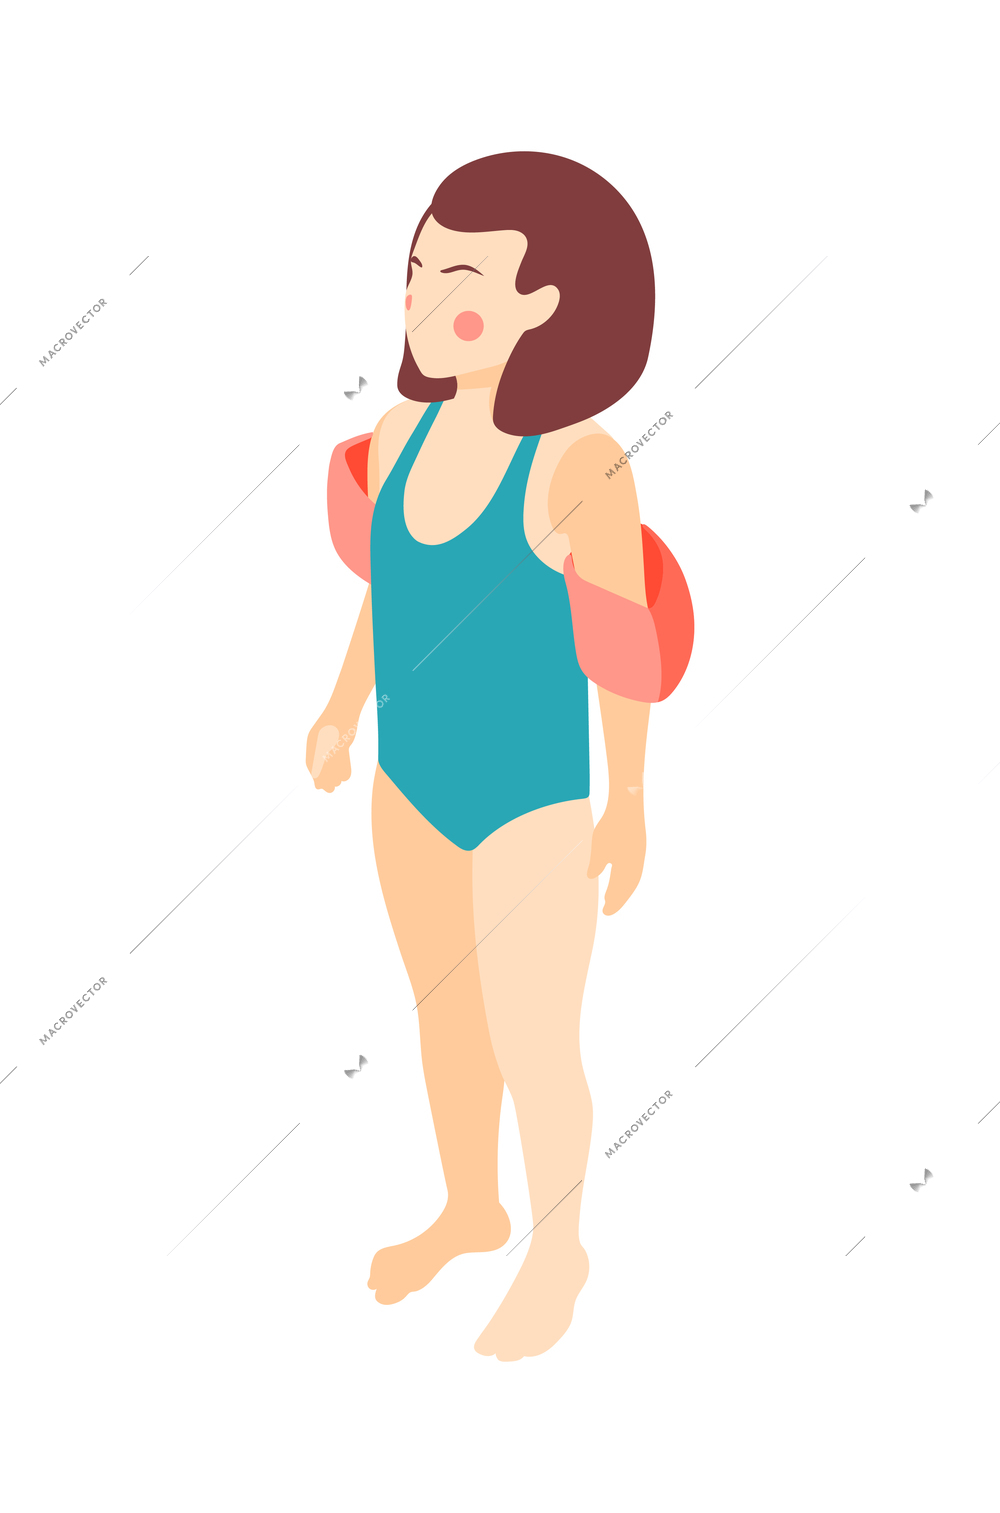 Aqua park isometric composition with human character of aquapark visitor on blank background vector illustration